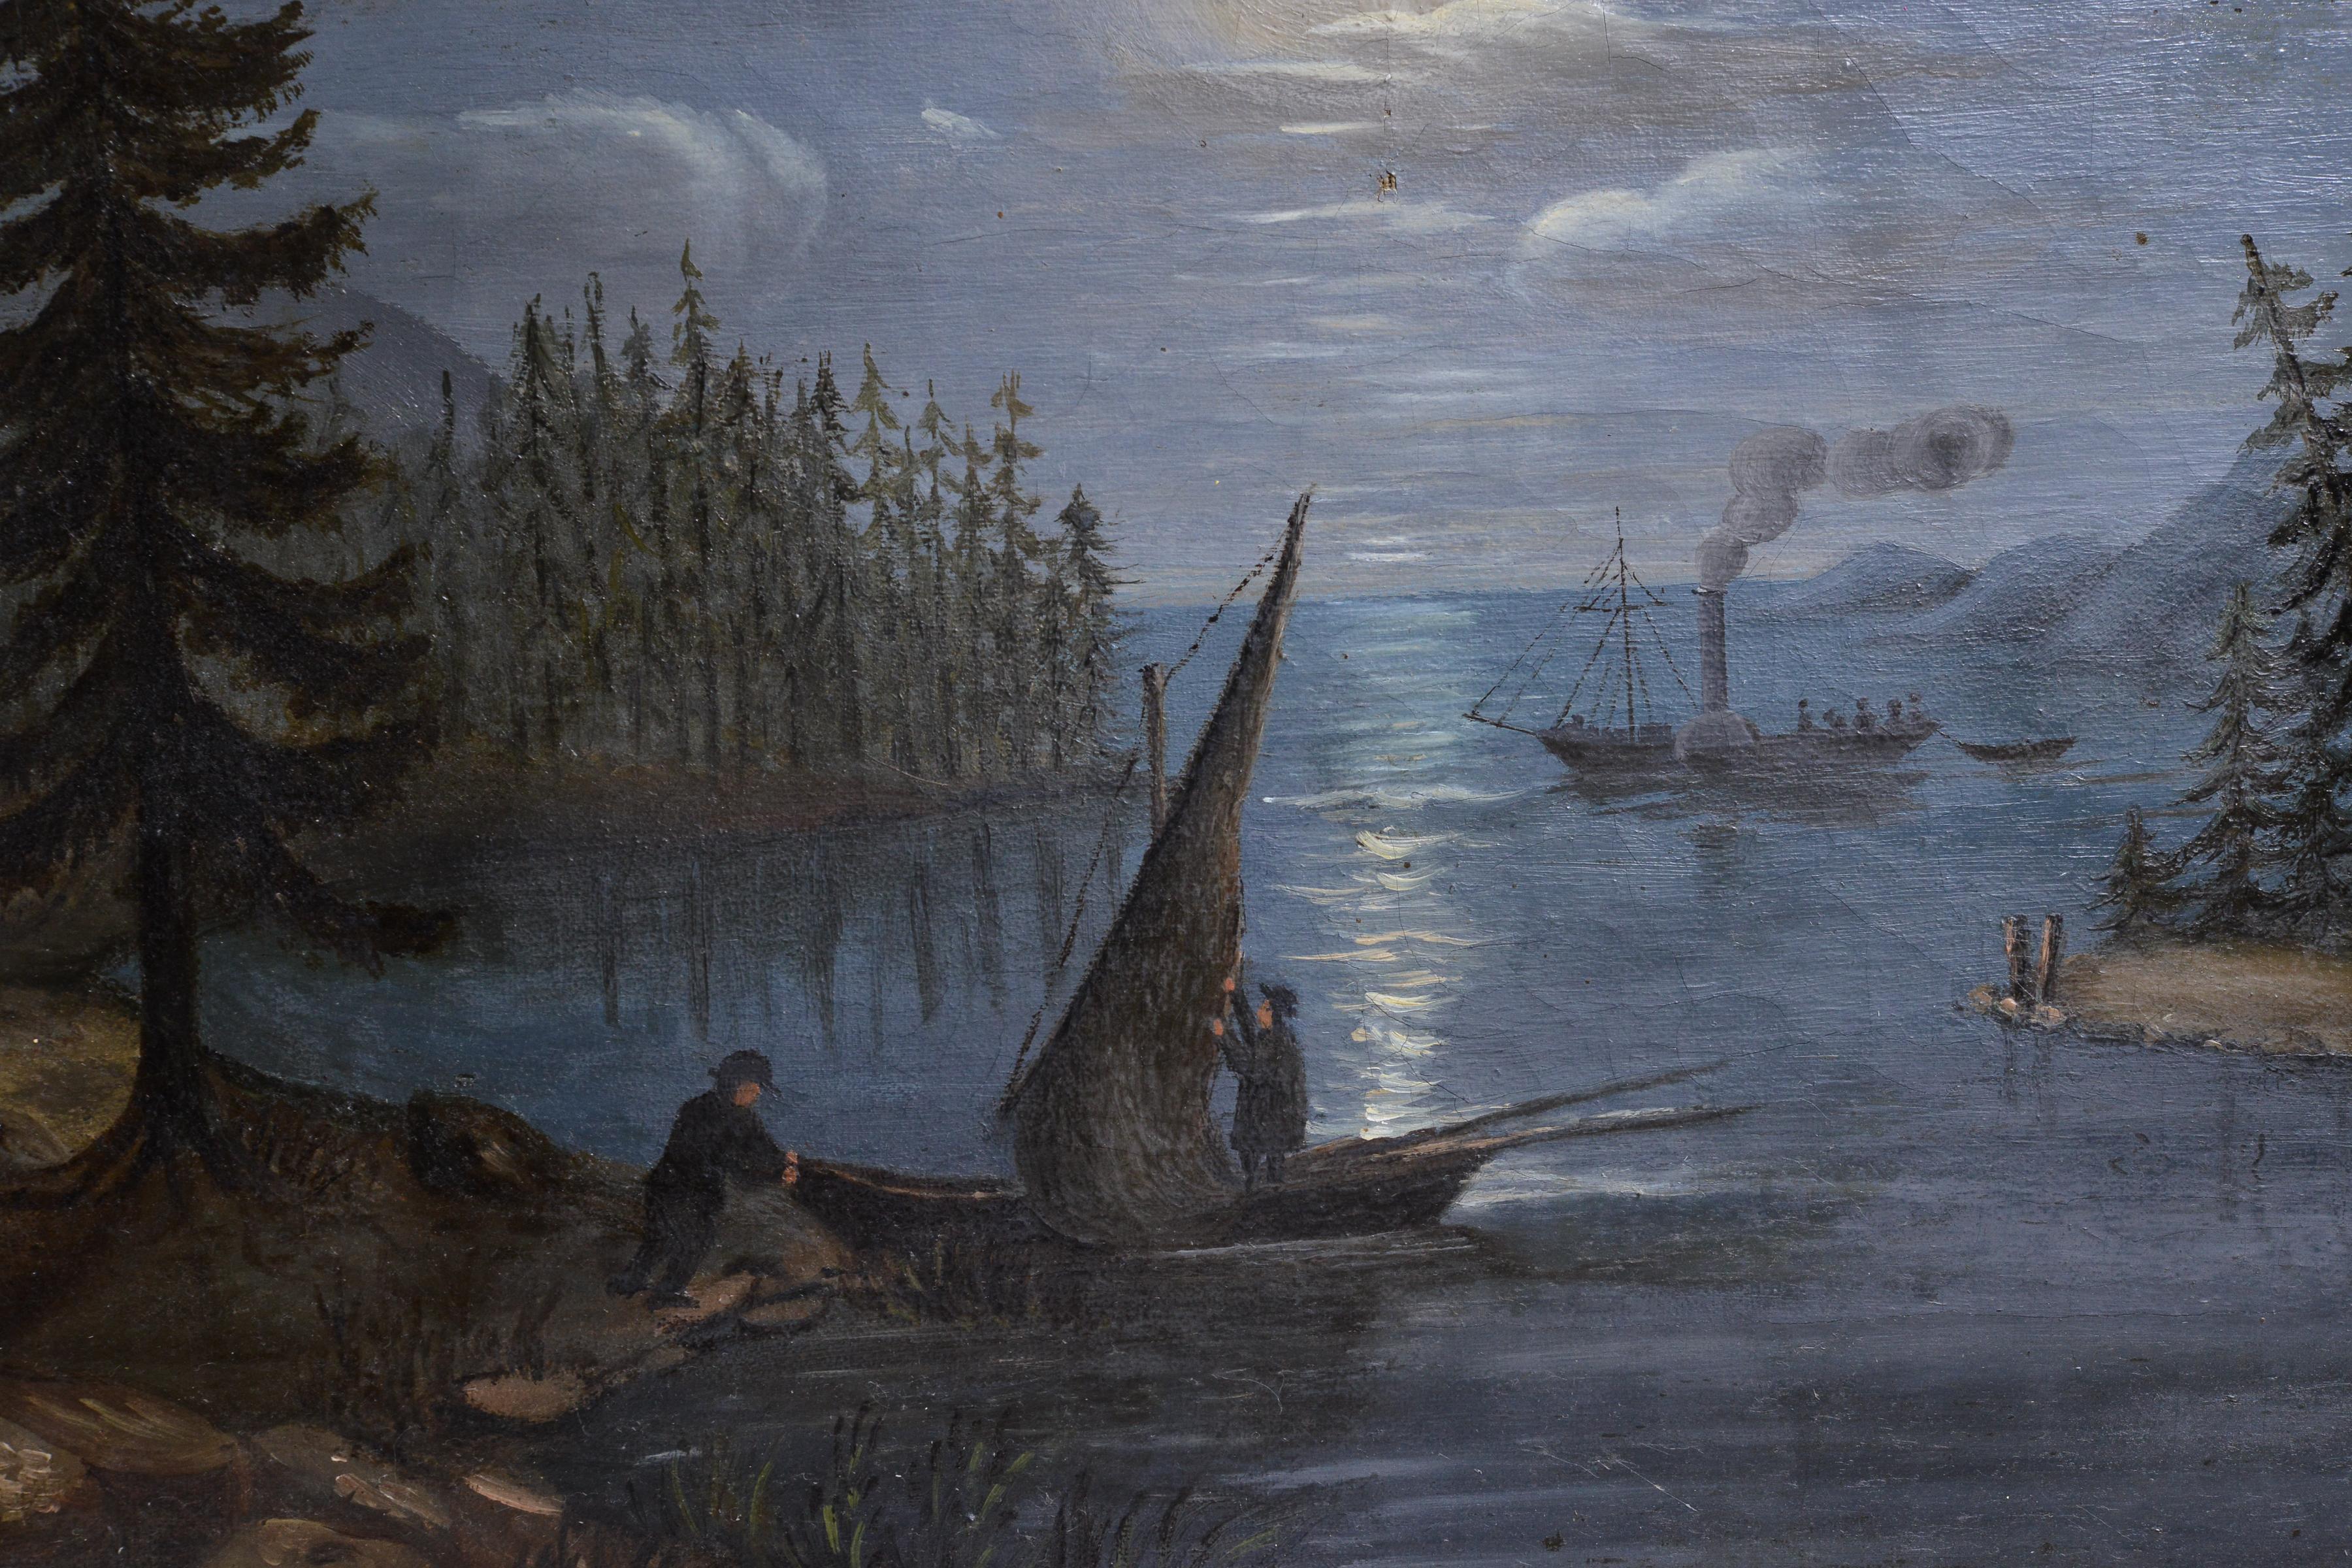 Nocturnal landscape exudes a sense of calm and serenity, drawing you in with its Naïve Romanticism manner, captured in oils by an unknown artist in the late 19th century. In the foreground you can see two fishermen in a sailing boat, who were late